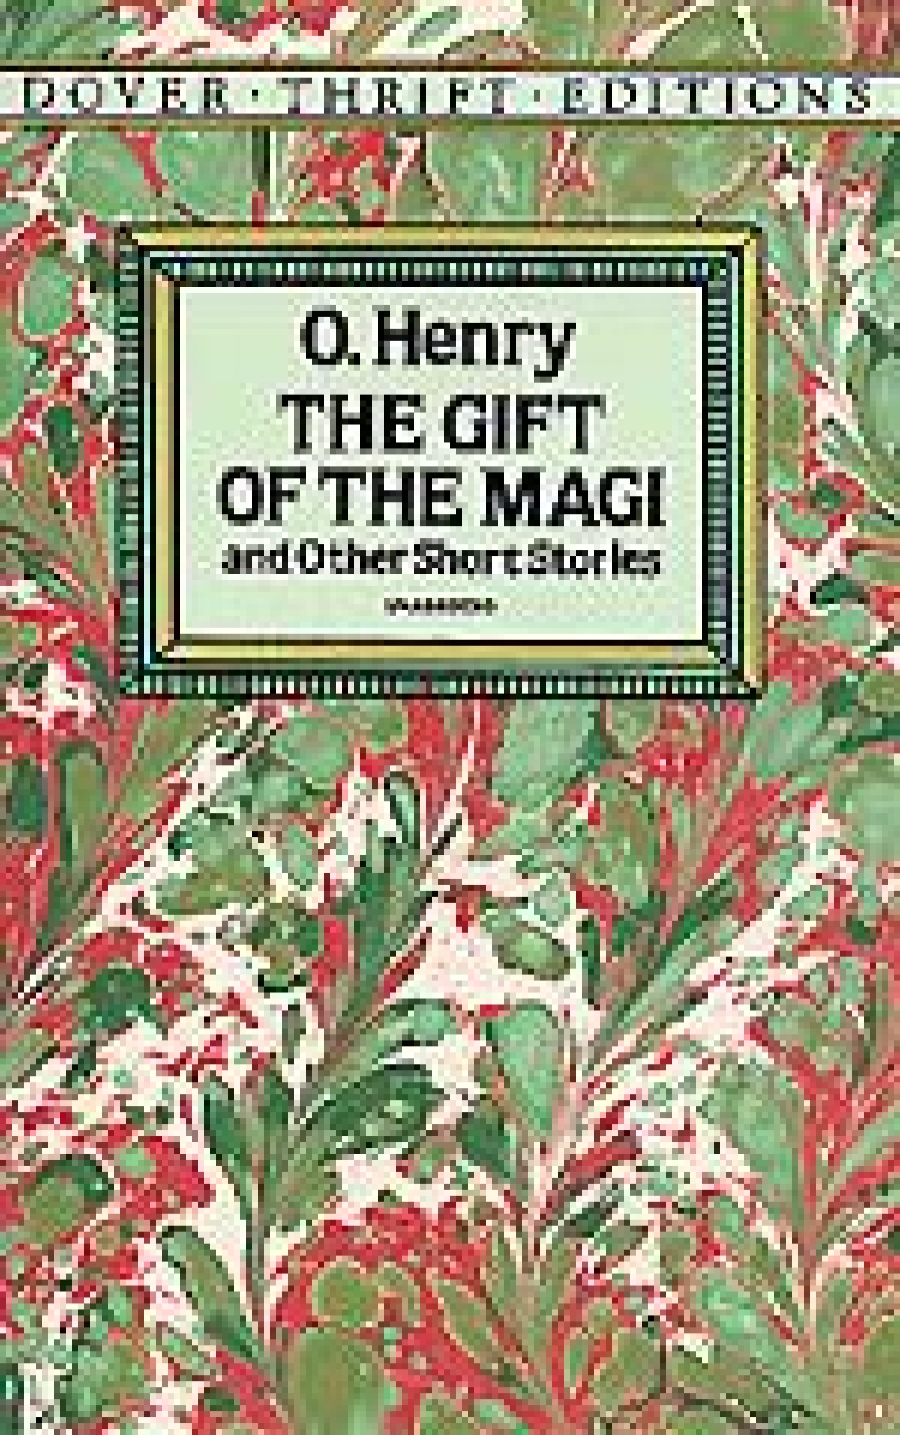 O'Henry The Gift of the Magi and Other Short Stories 